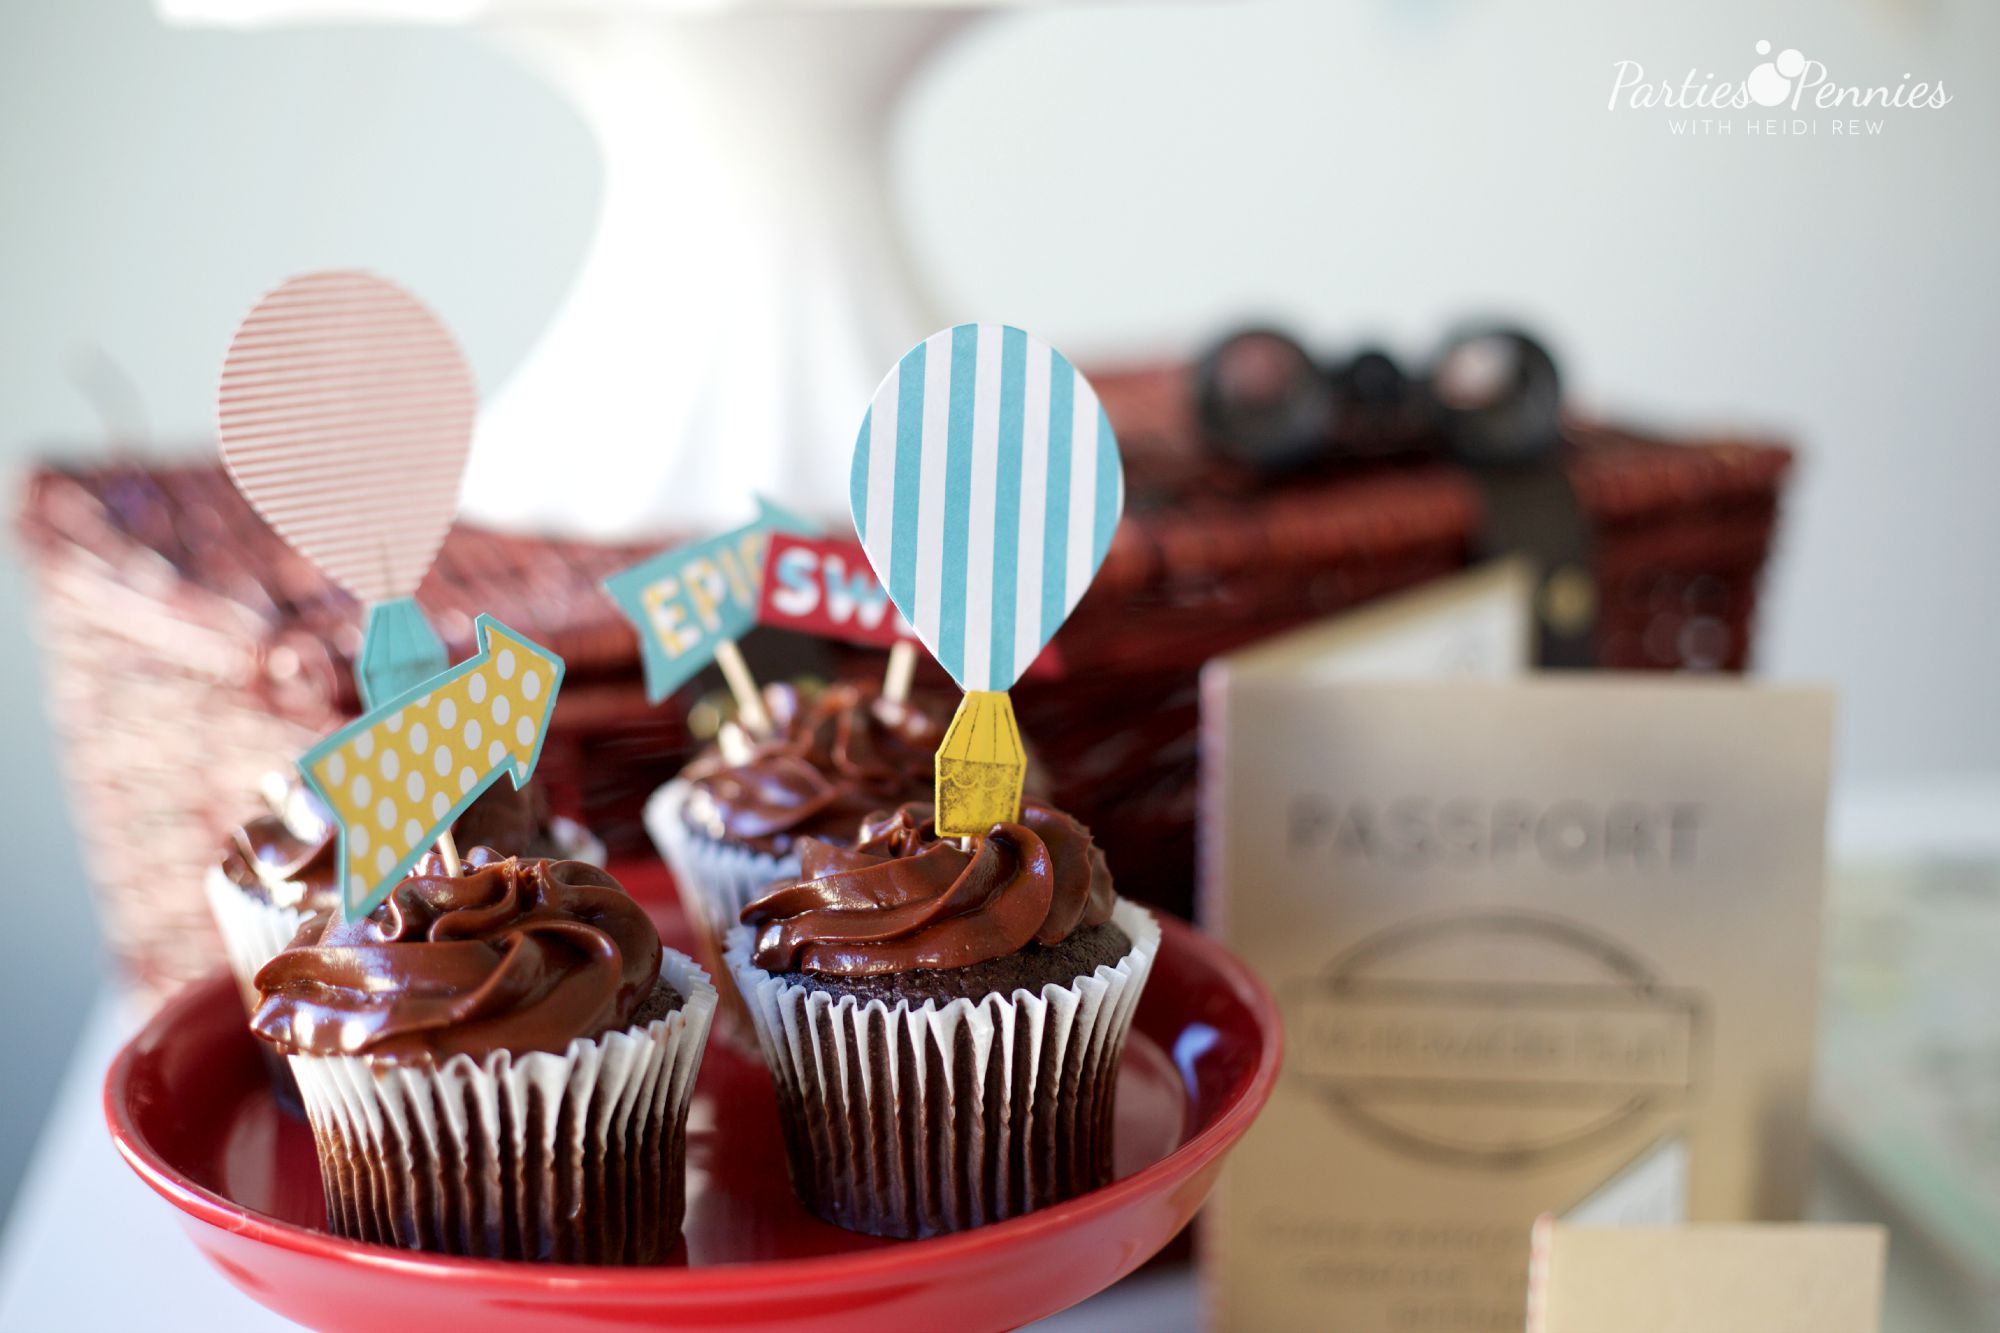 Passport Party | Travel Themed Party | Cupcake Toppers | PartiesforPennies.com | #Sizzix #videotutorial #travel